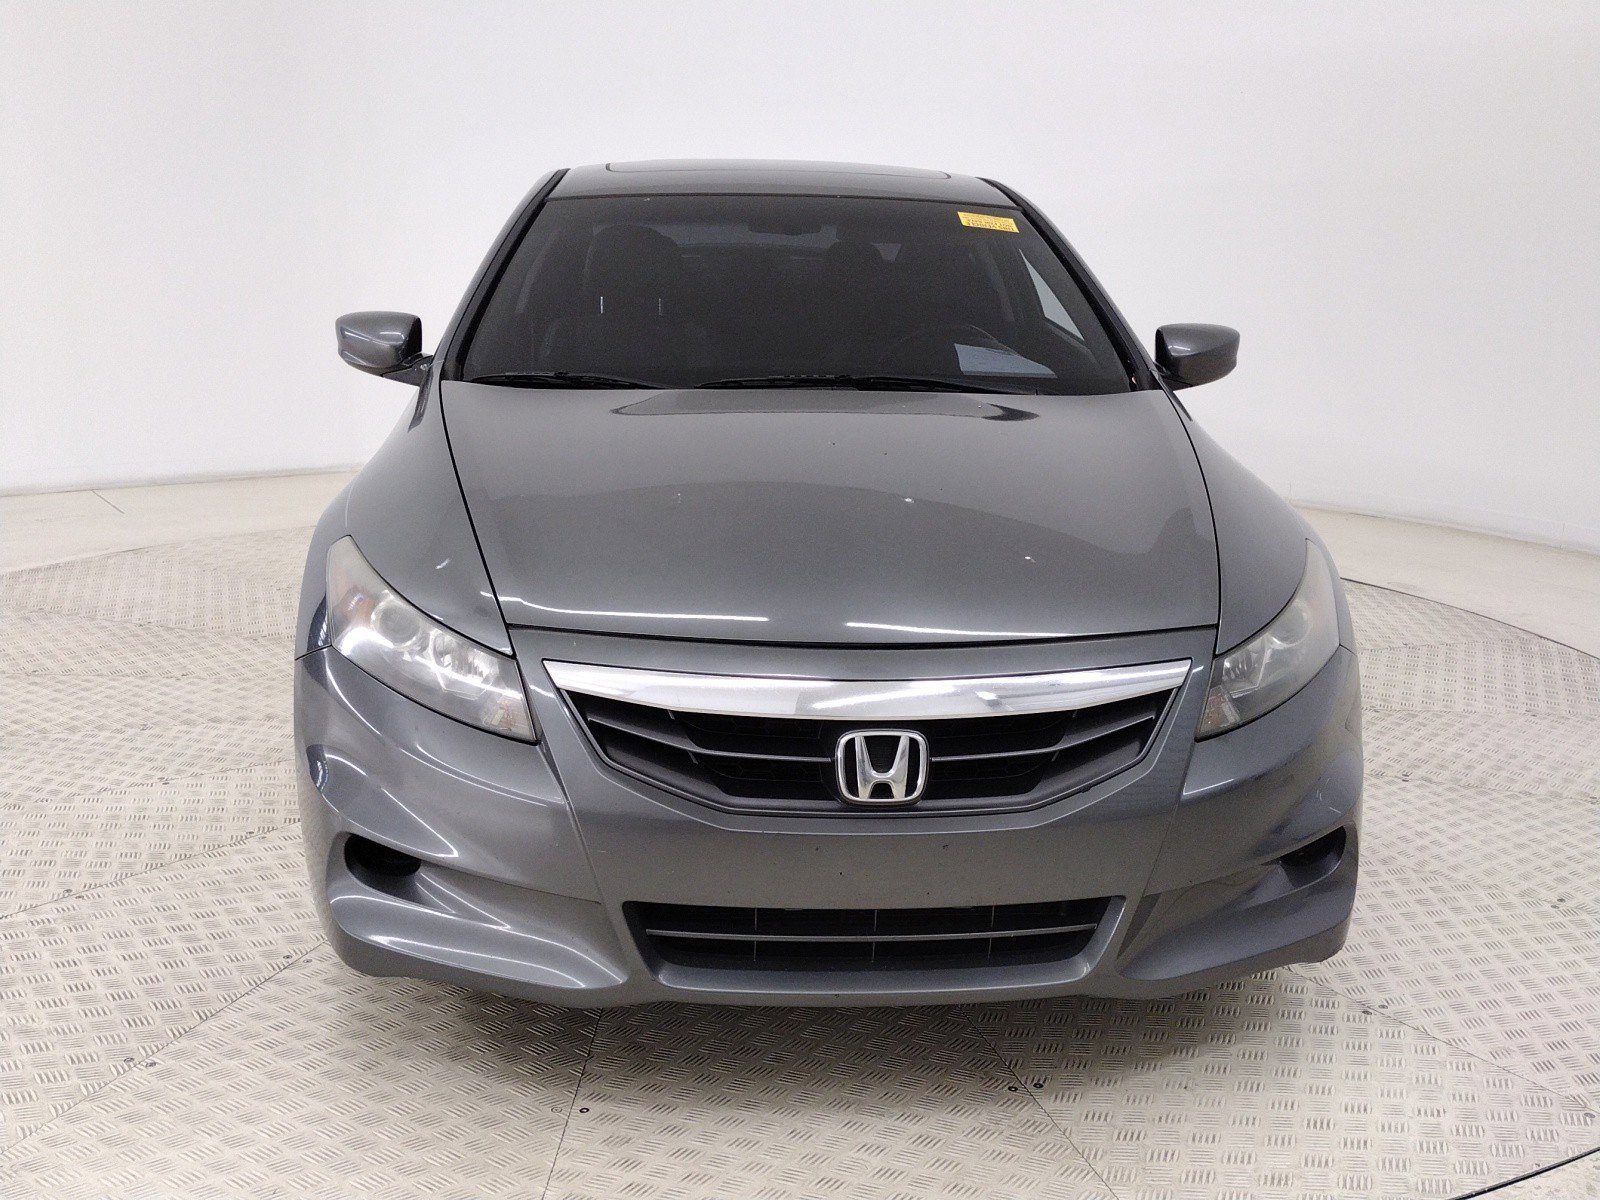 Used 2012 Honda Accord EX-L with VIN 1HGCS1B8XCA018845 for sale in Fort Mill, SC